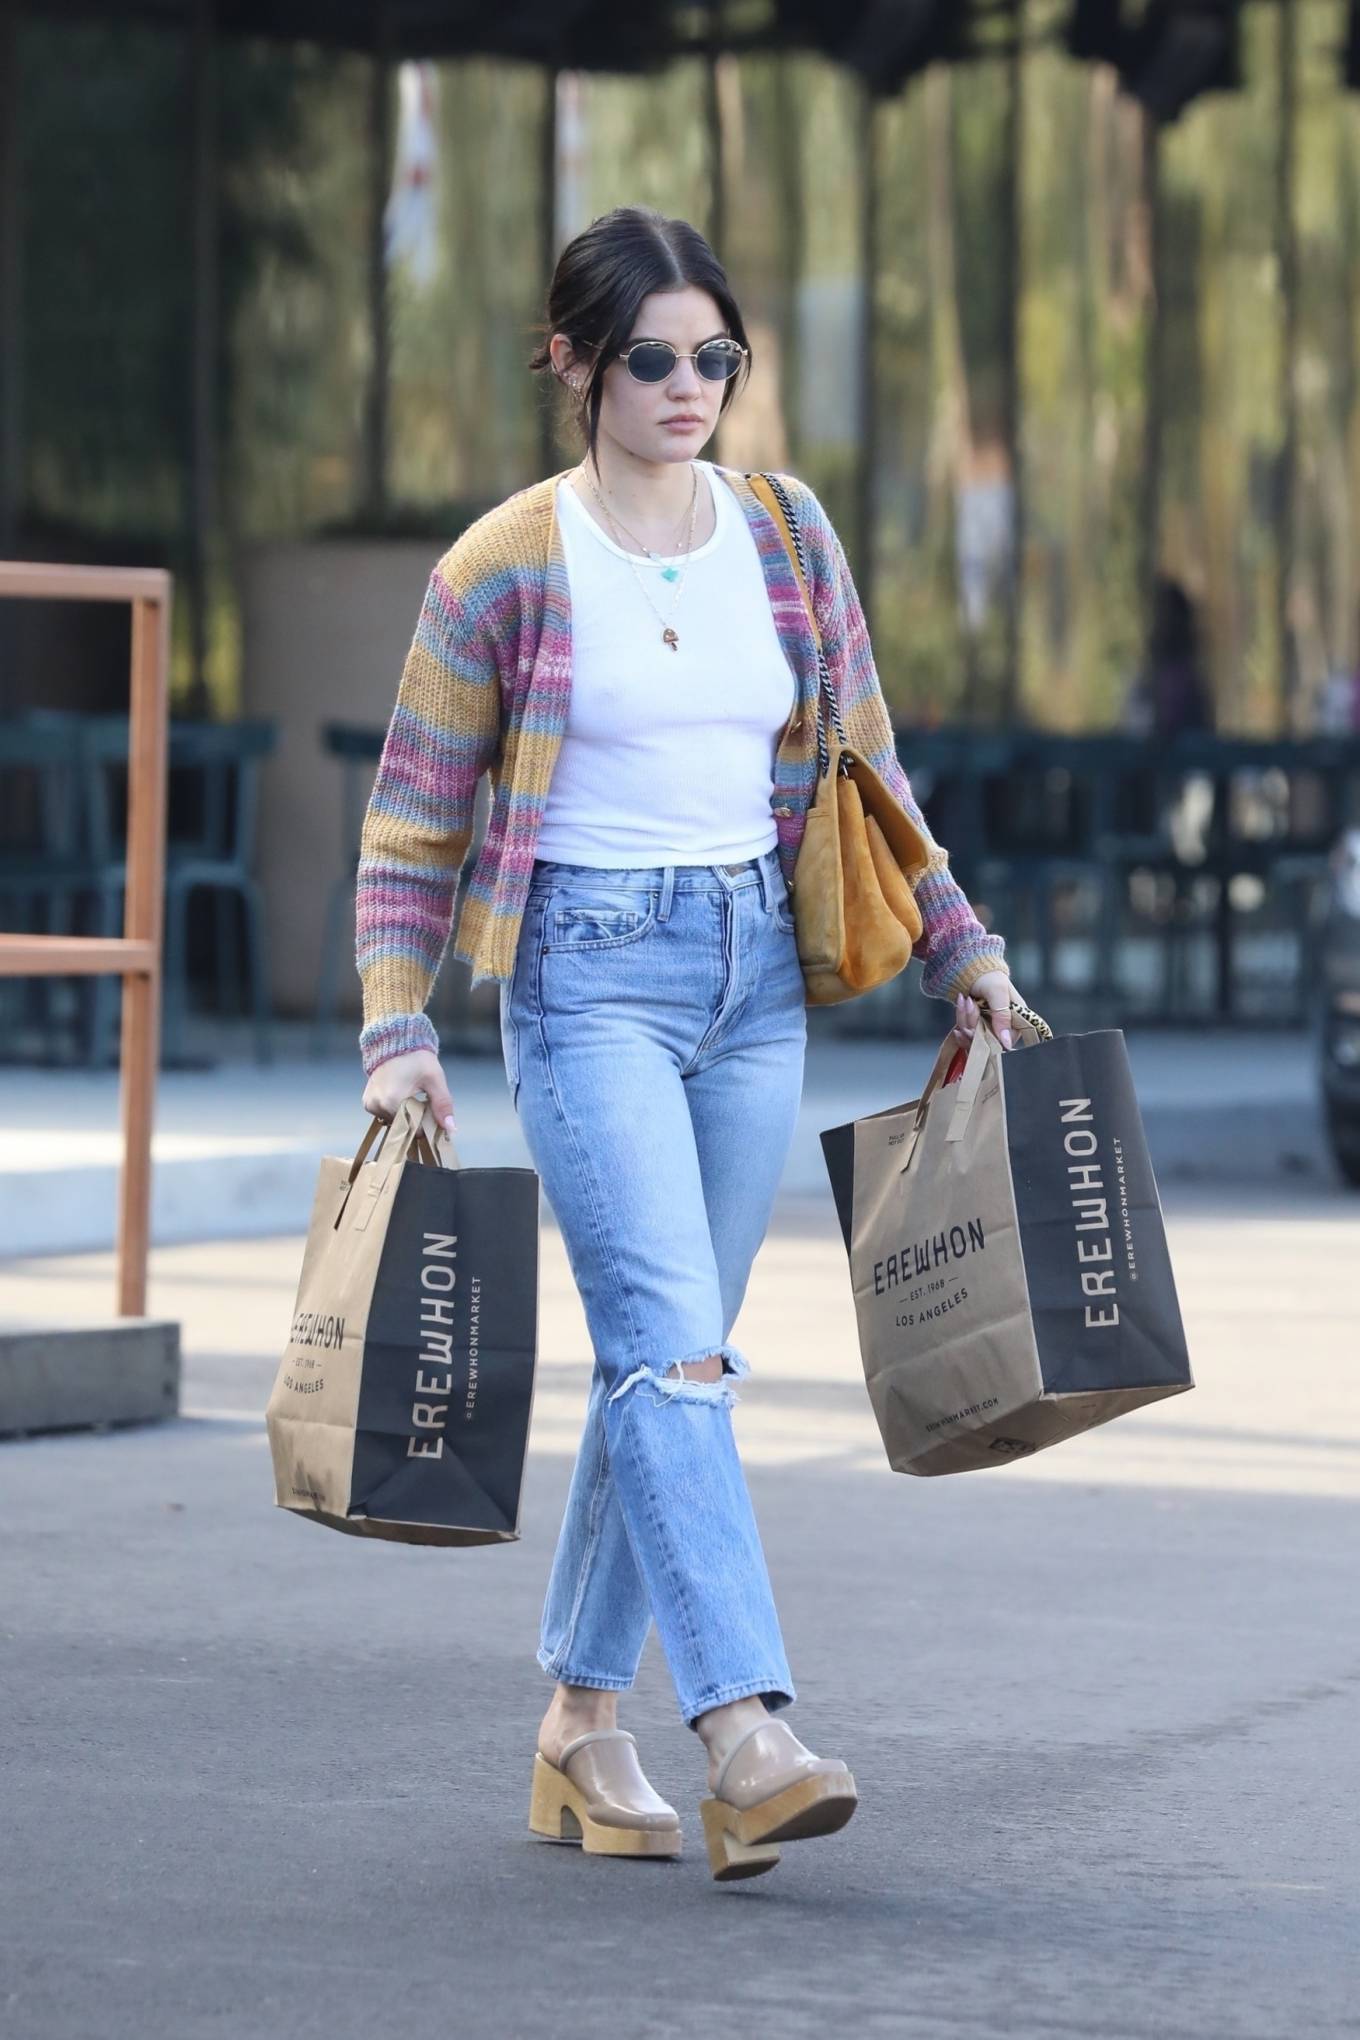 Lucy Hale 2021 : Lucy Hale – Grocery shopping at Erewhon Organic Grocers in Los Angeles-01